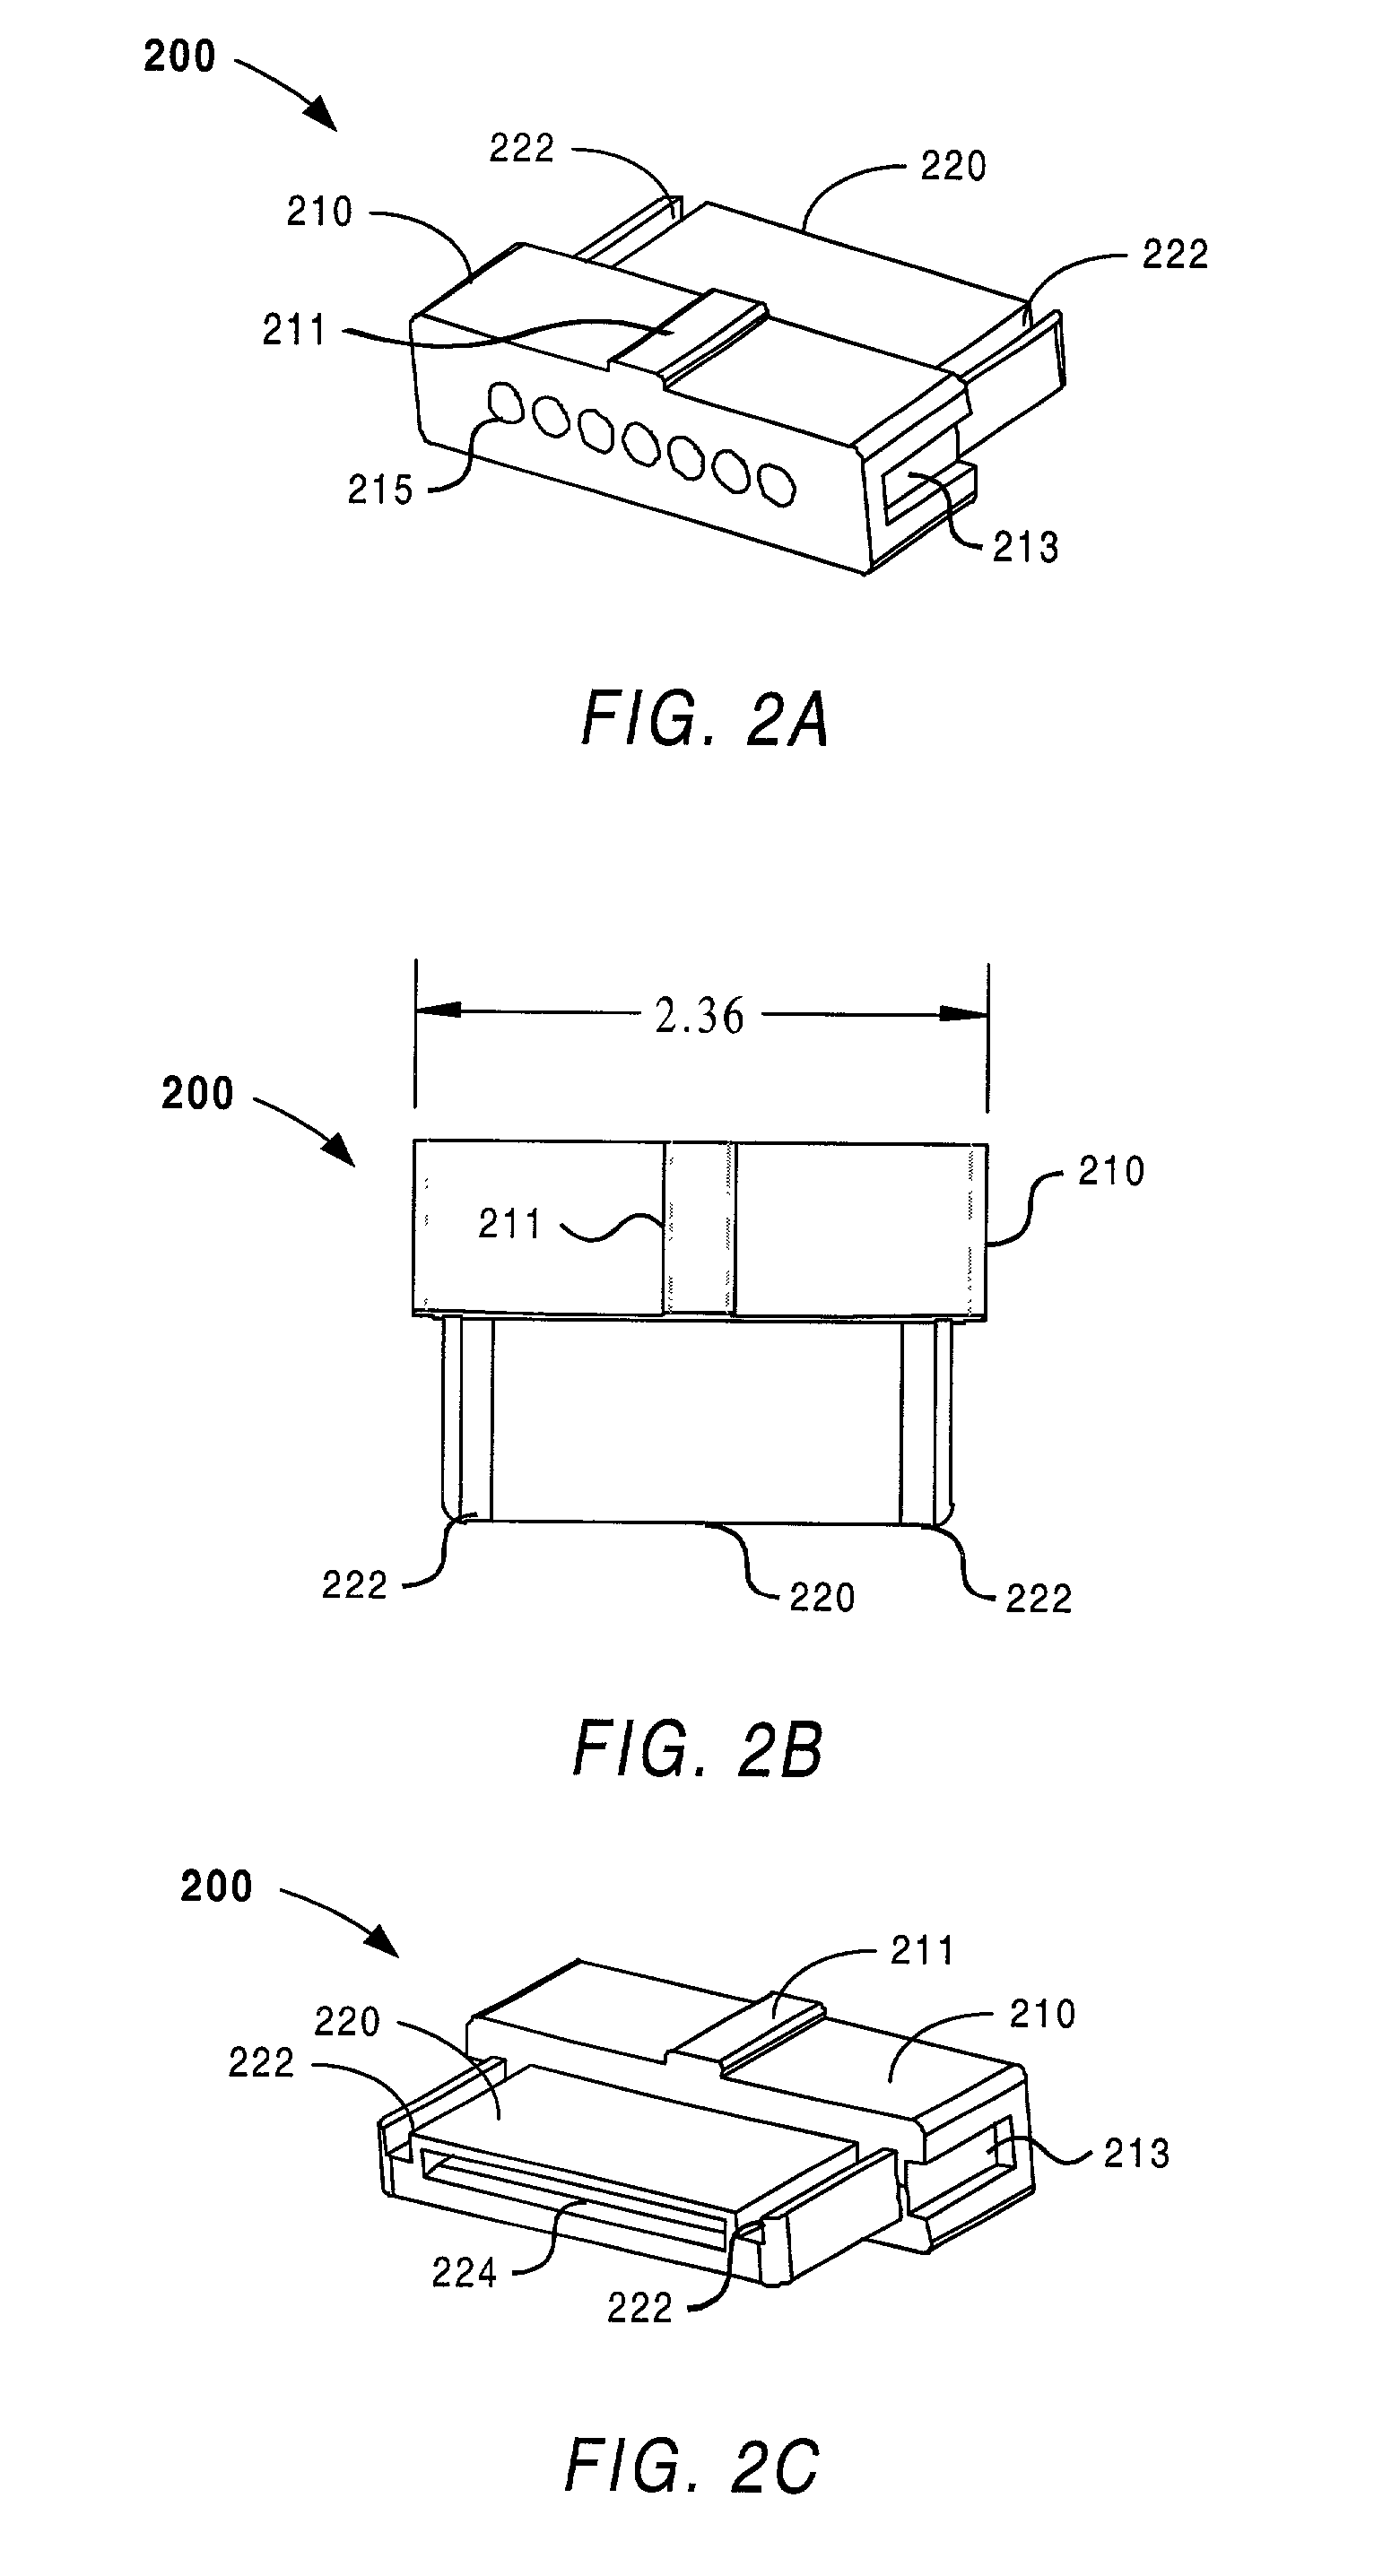 Versatile adaptor device and manufacturing process for connecting a client device to various host devices